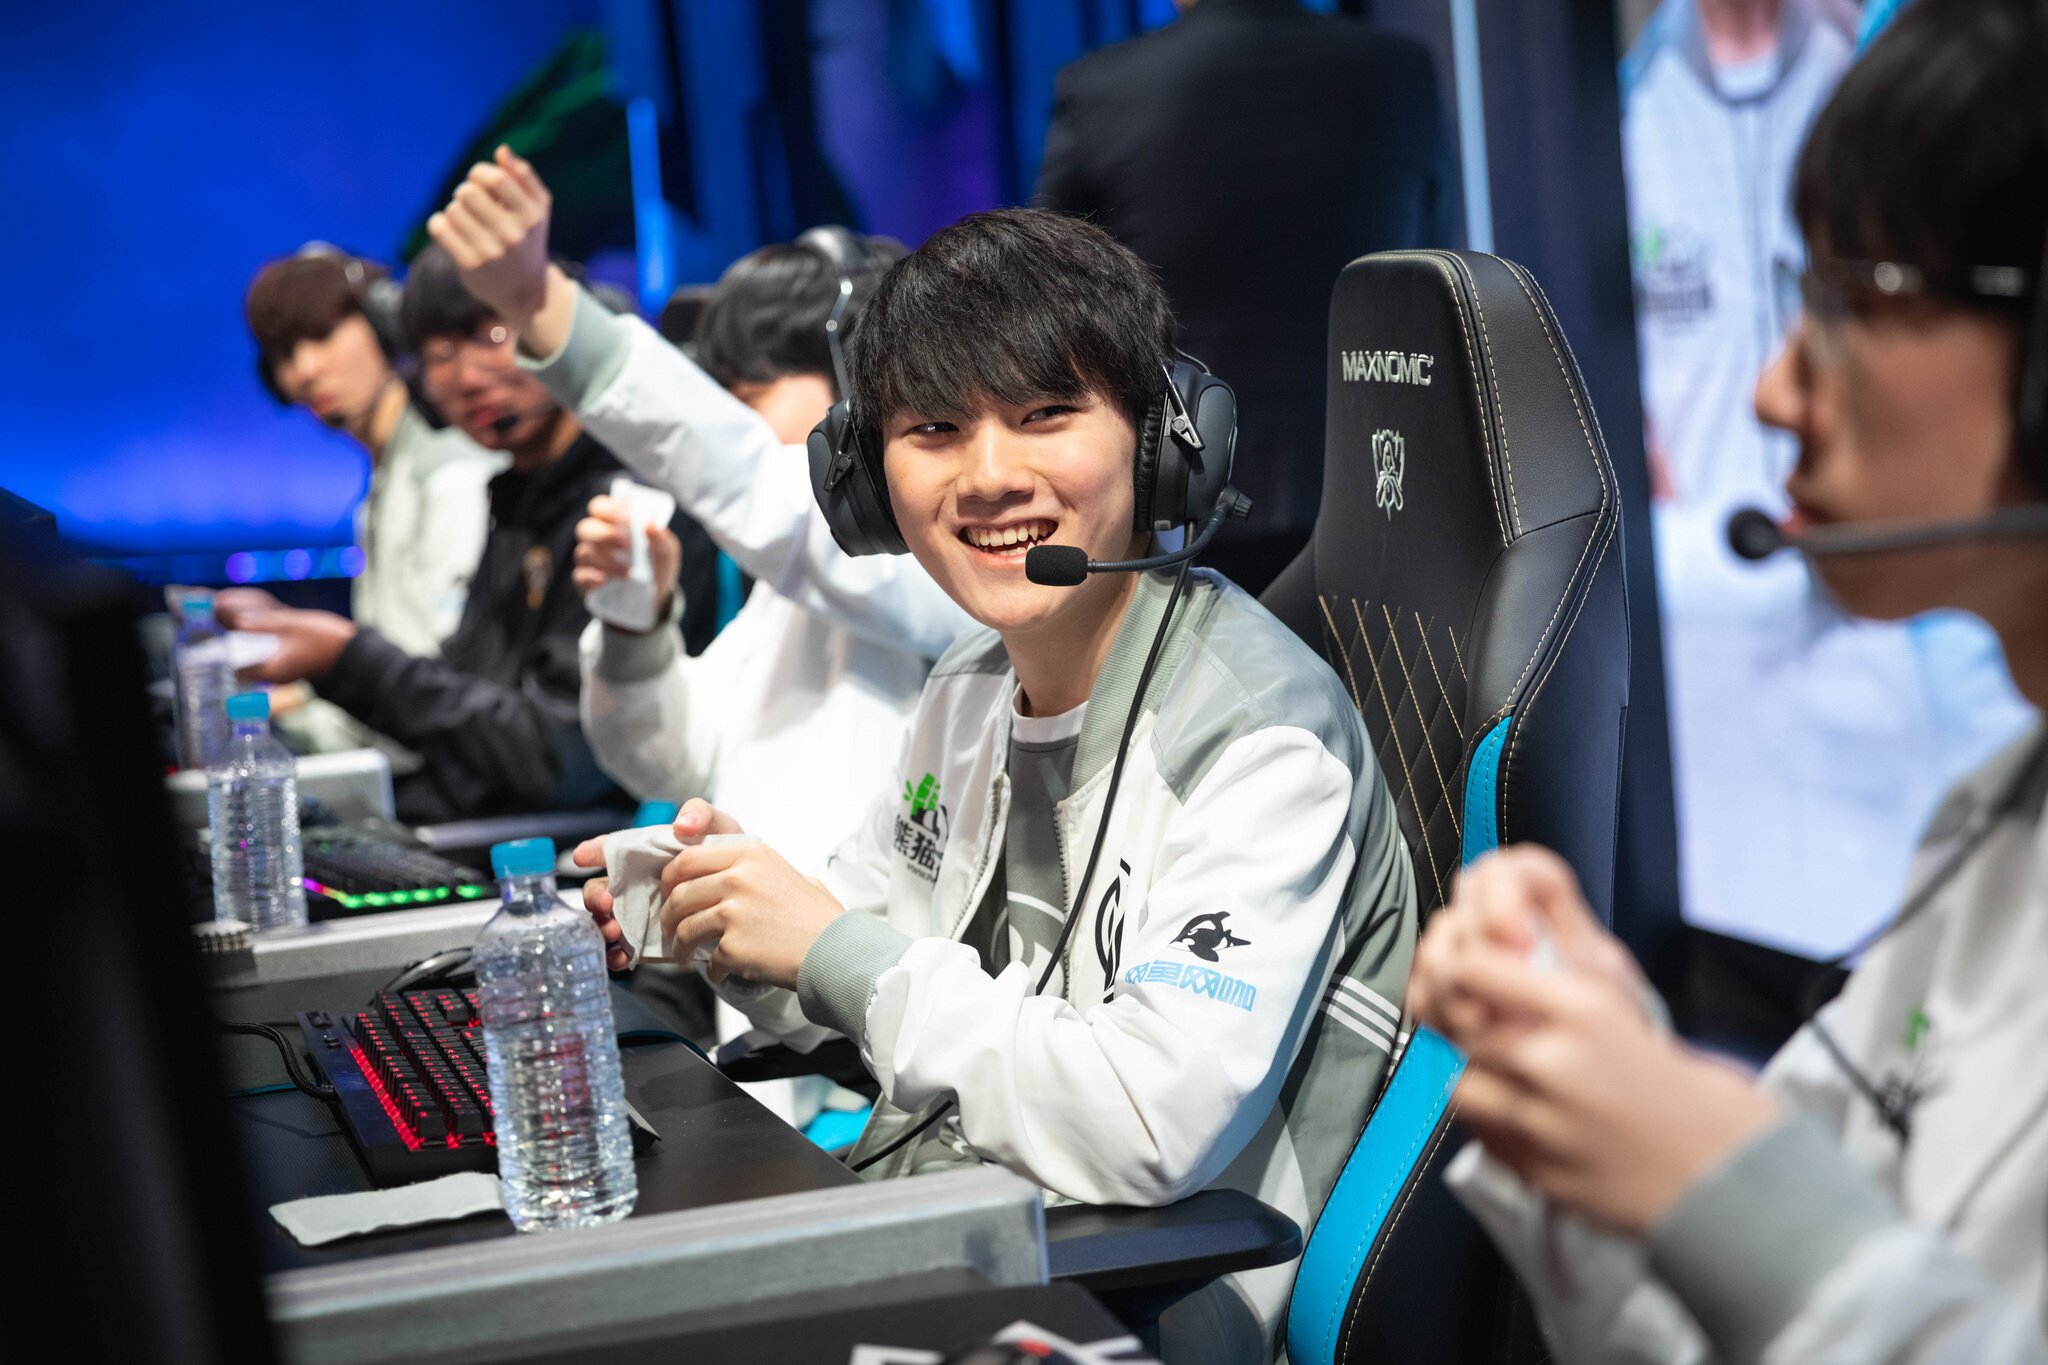 Invictus Gaming swept G2 Esports in 2018 League of Legends World Championship semifinals and have booked themselves a date in the Finals on Nov 3.